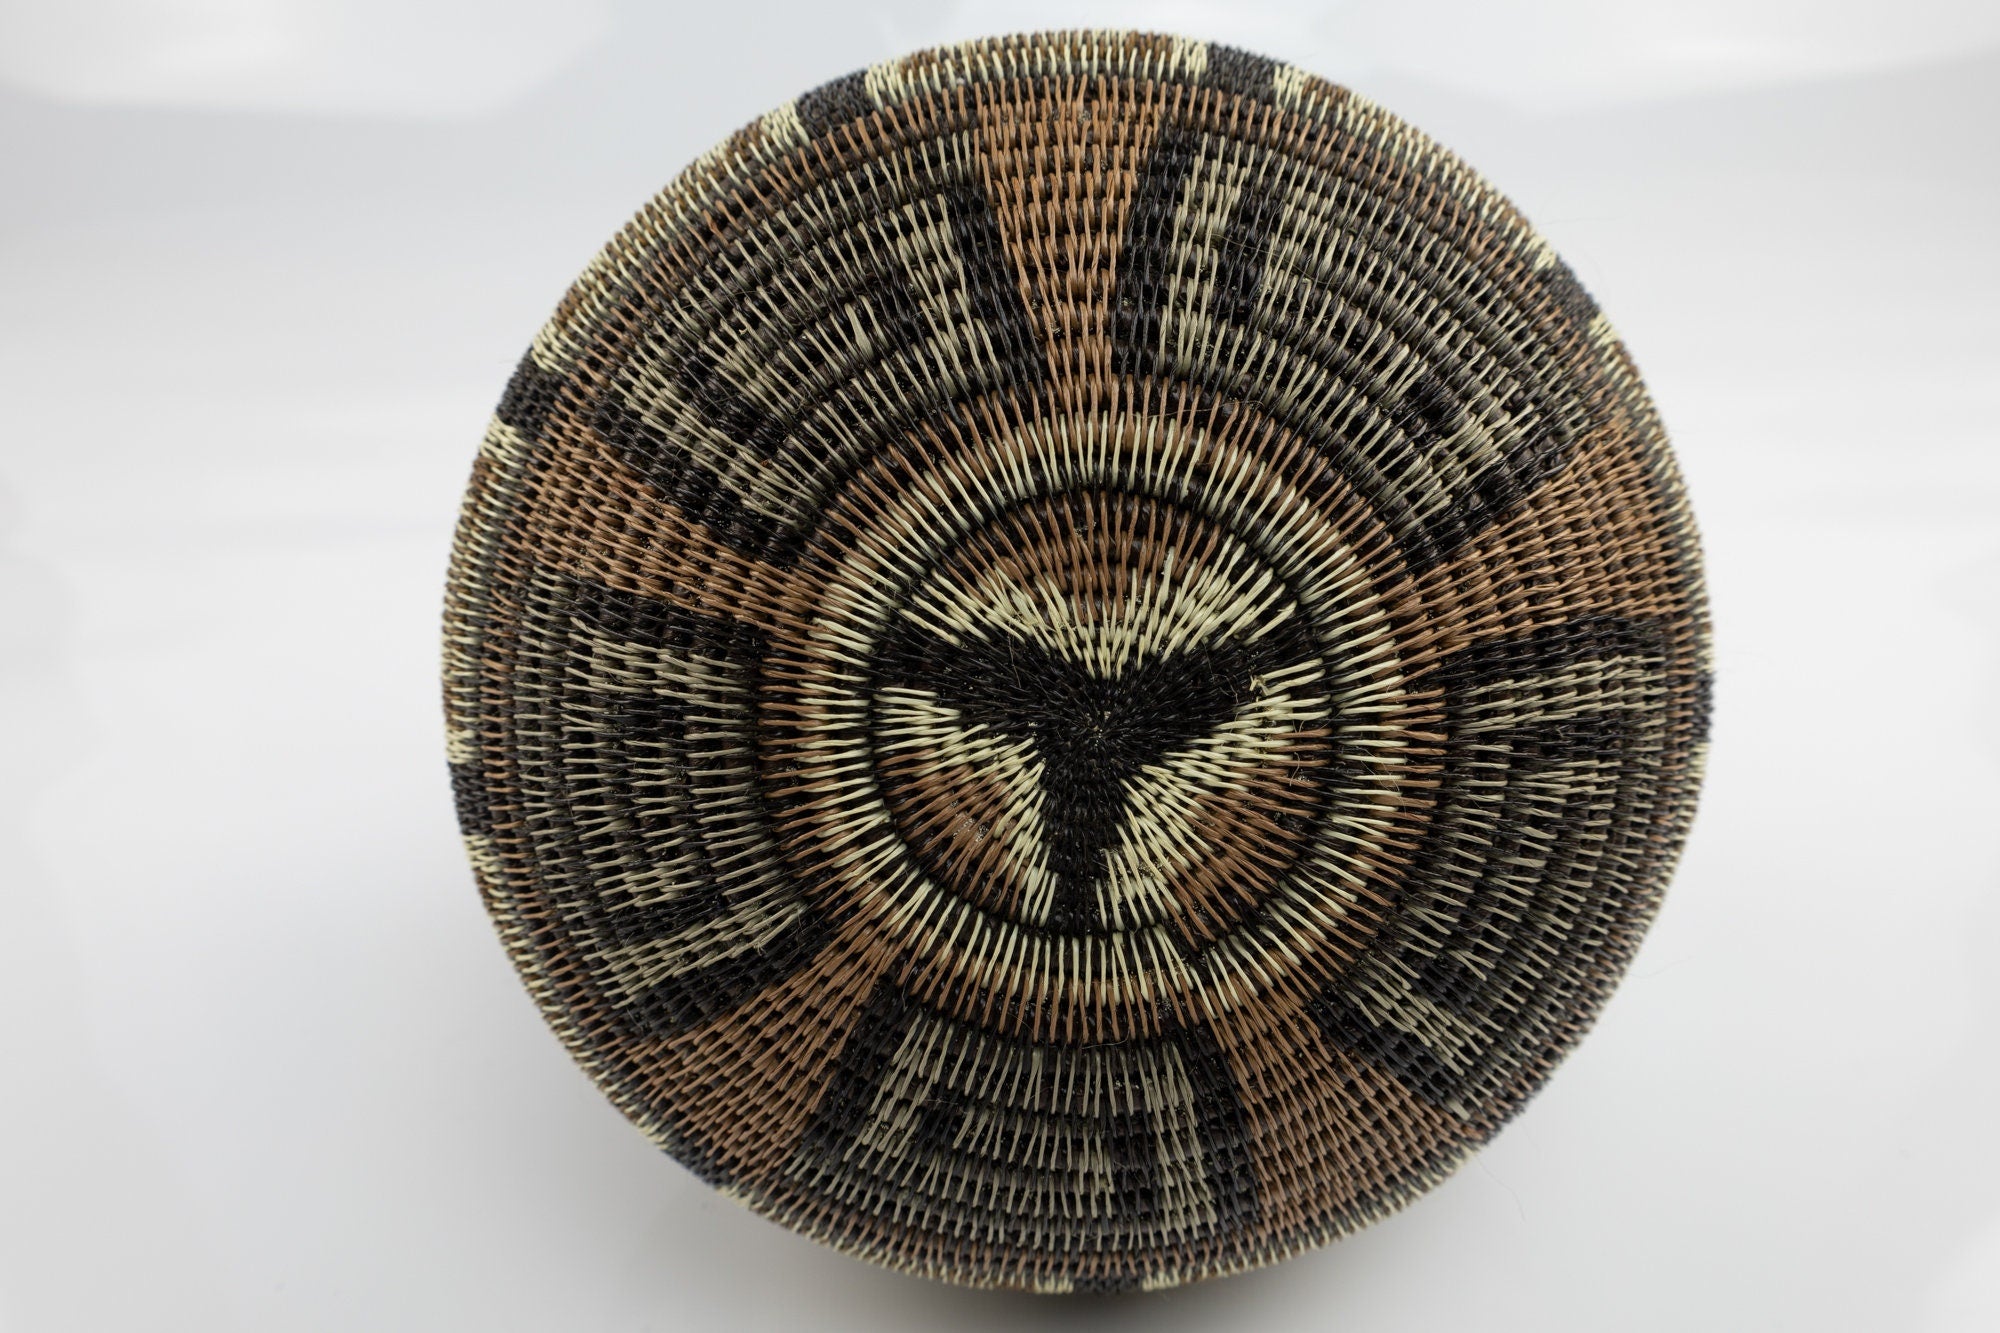 Hand Woven Classic Basket Made By Wounaan And Emberá Panama Indians. Bowl Basket, Woven Basket, Basket Decor, Woven Storage